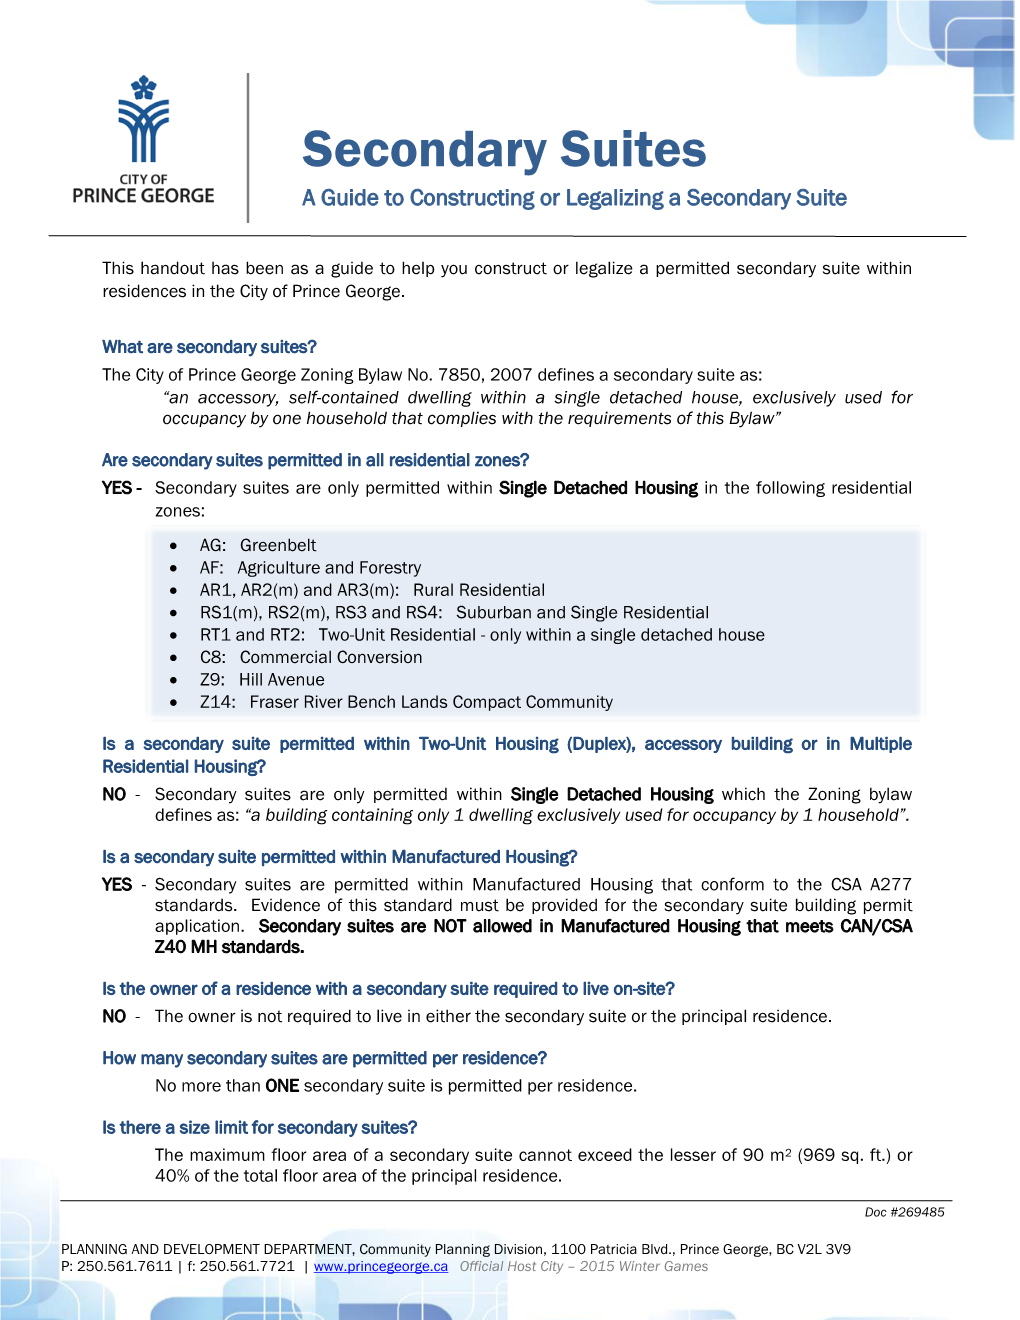 Secondary Suites a Guide to Constructing Or Legalizing a Secondary Suite